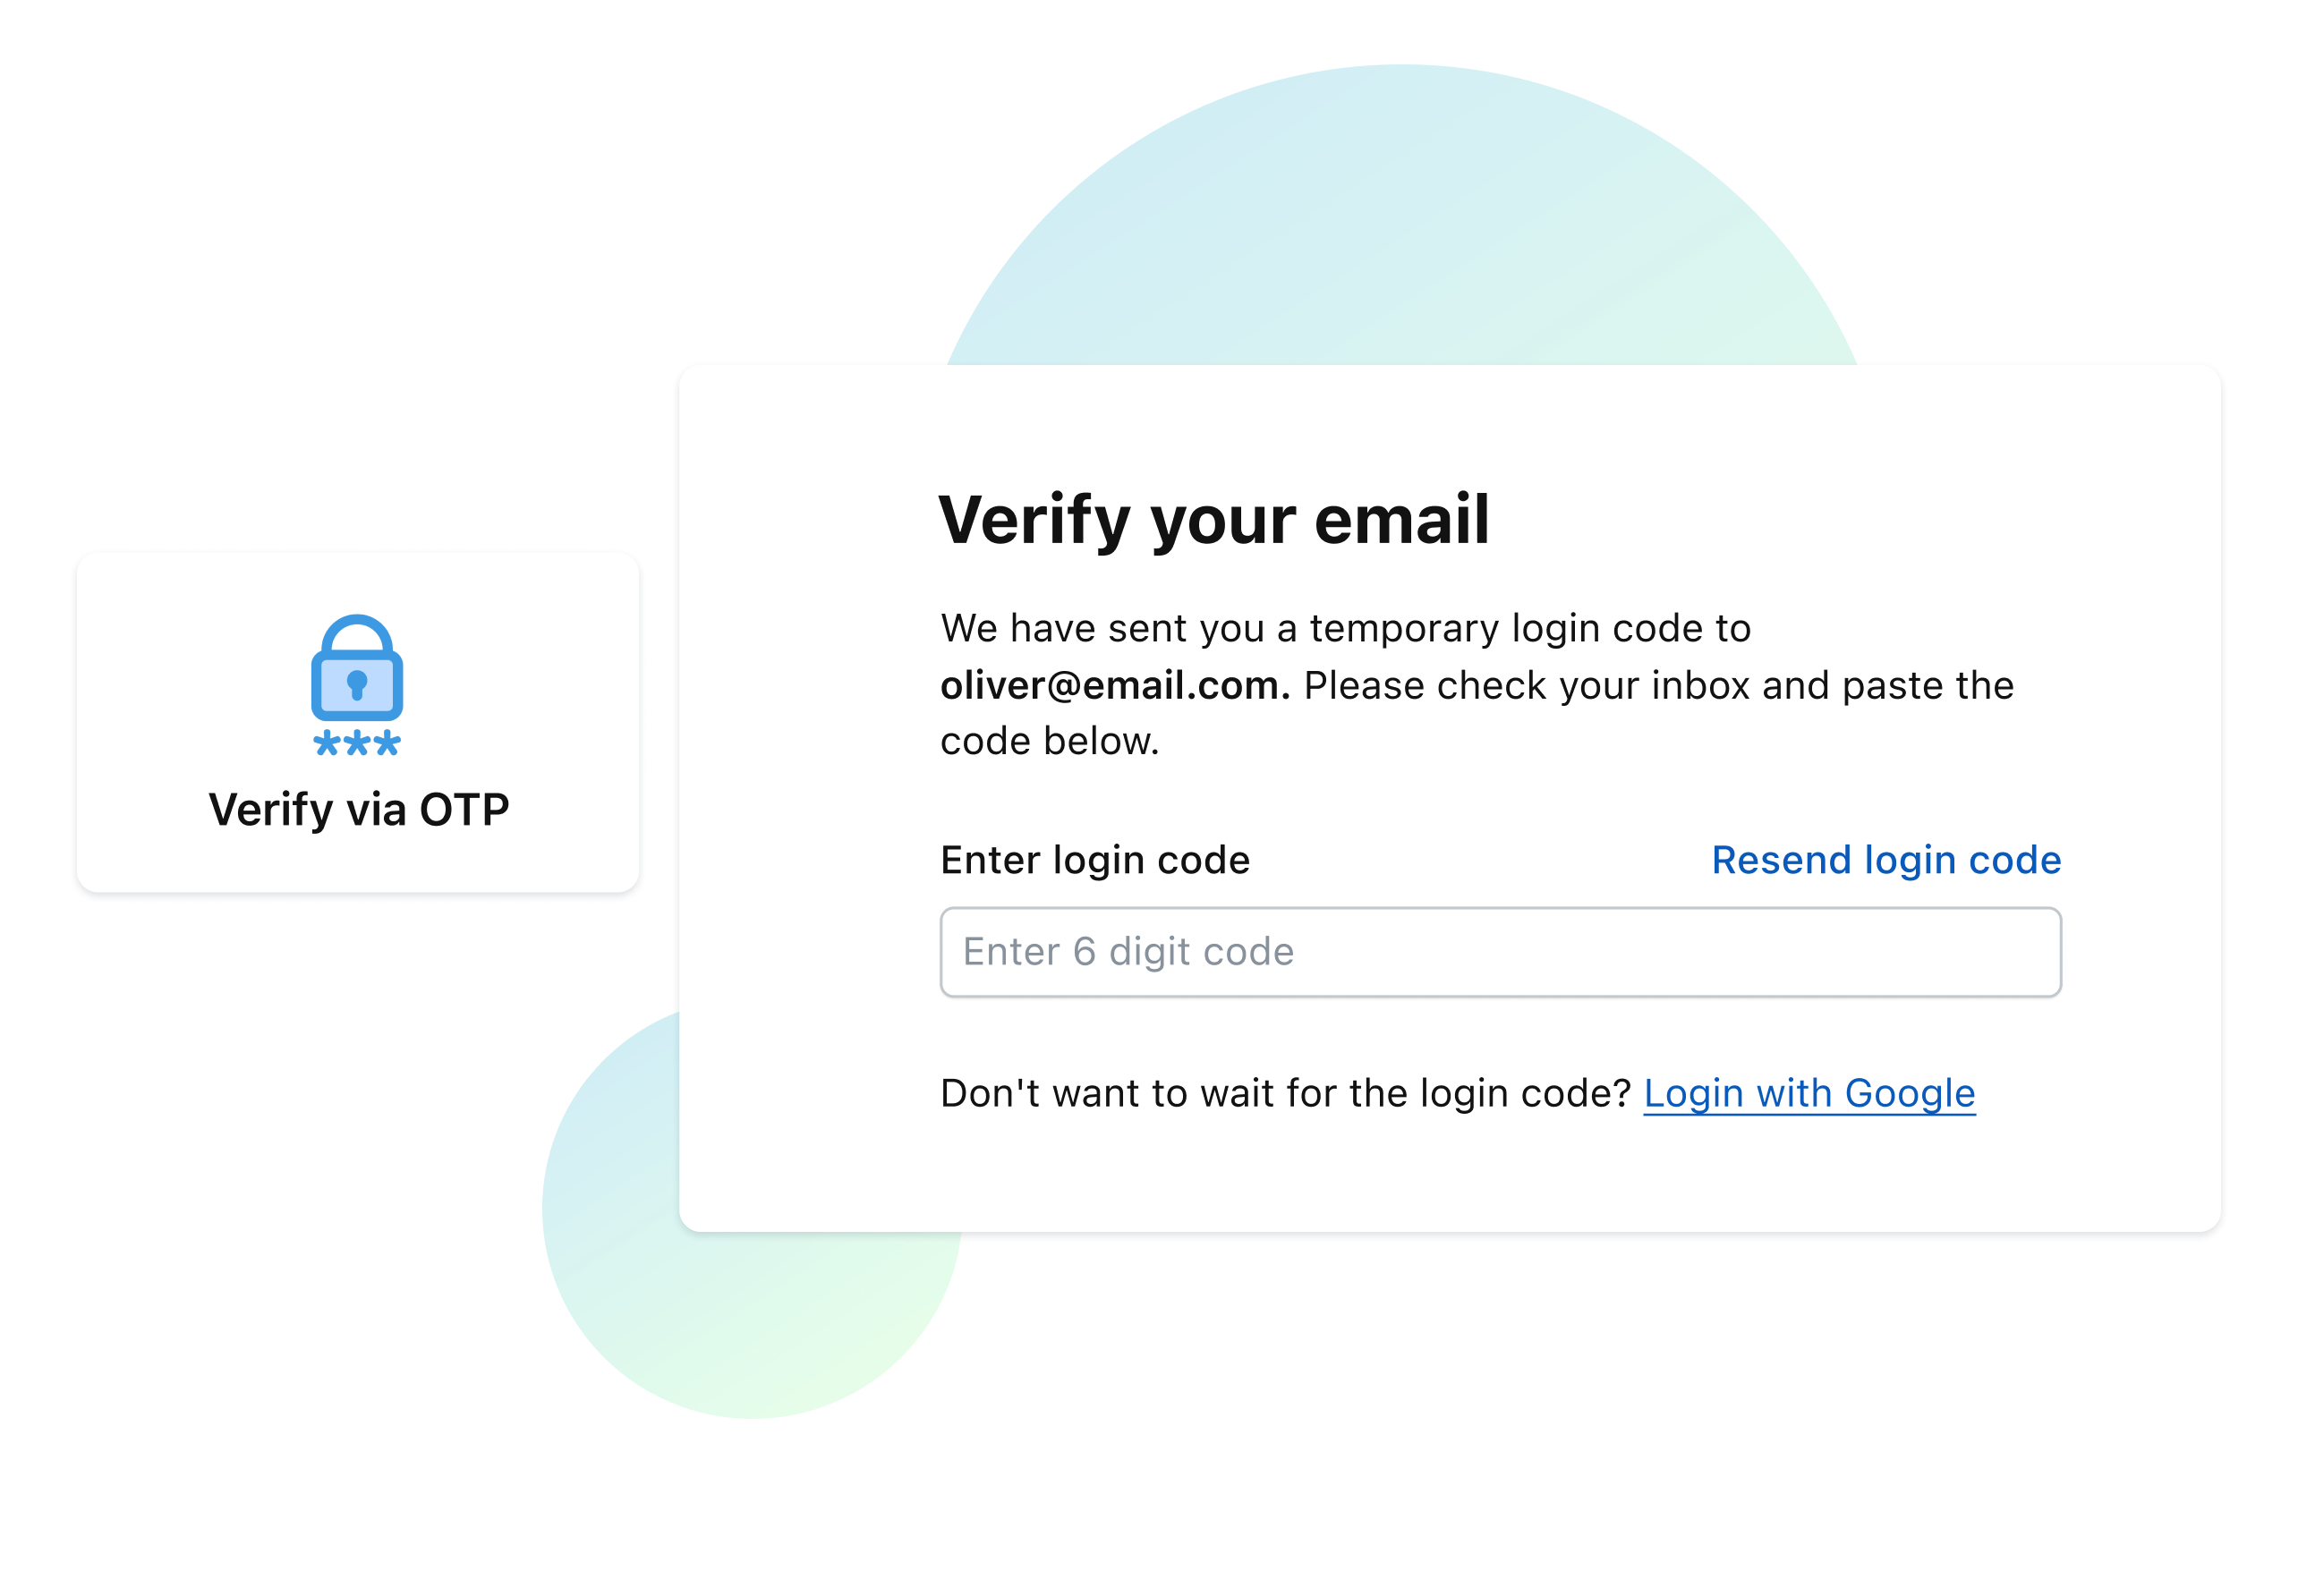 Email verification using OTP